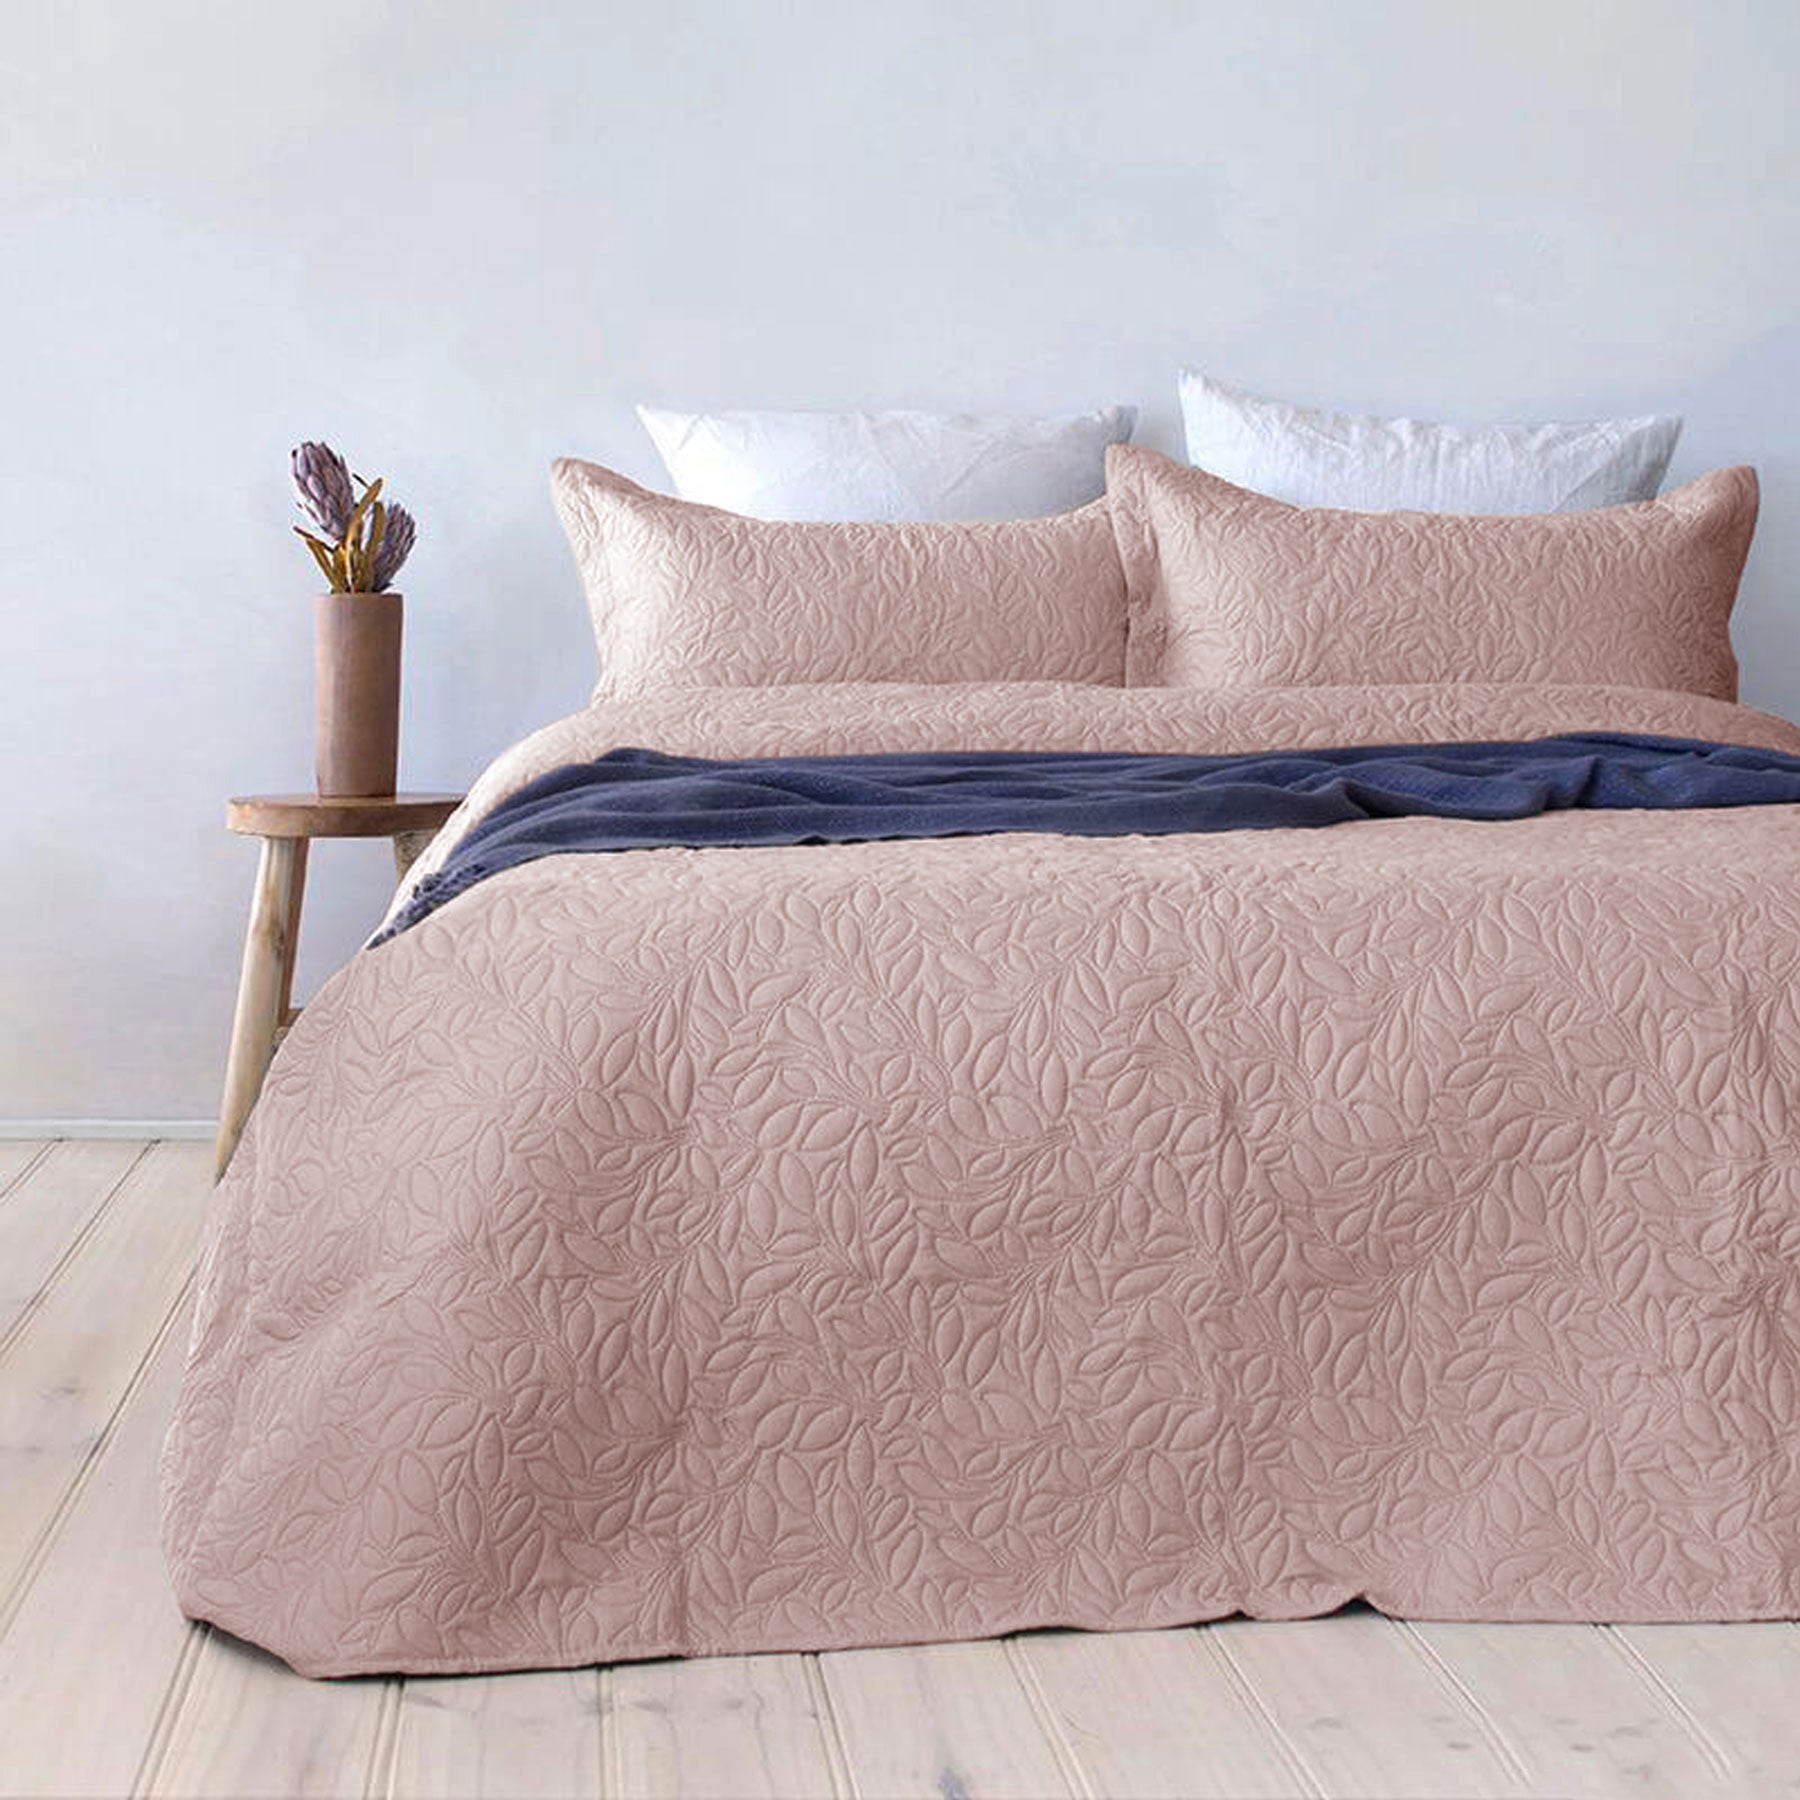 Botanica Embossed Coverlet Set Single/Double by Bambury available in 5 Colors